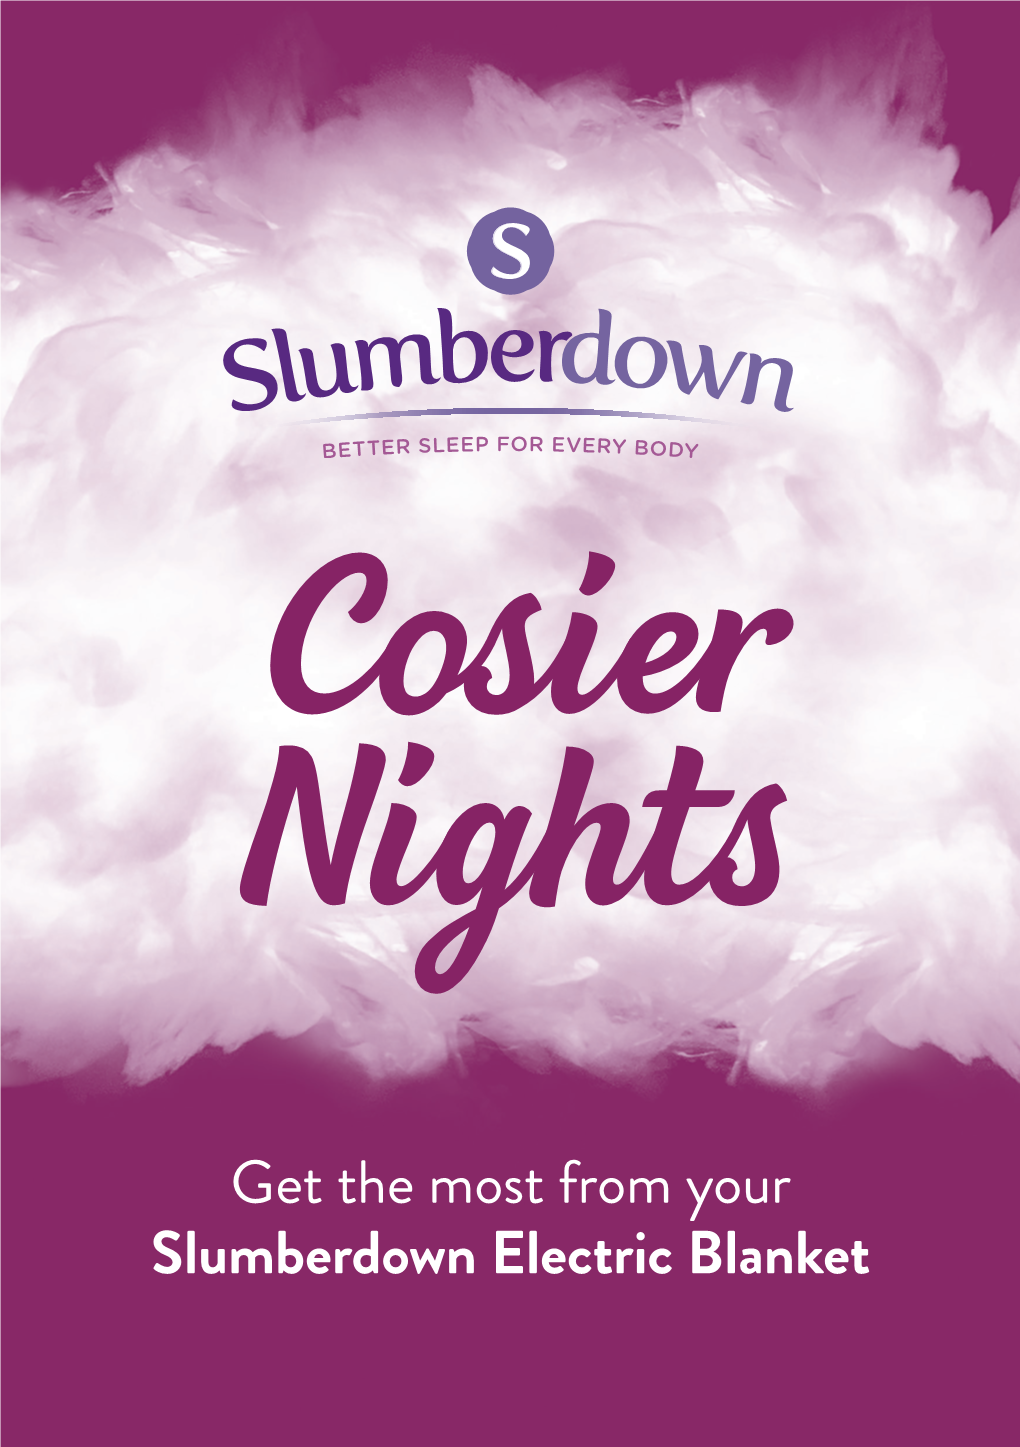 Get the Most from Your Slumberdown Electric Blanket We Know You Can’T Wait to Plug in Your Slumberdown Electric Blanket